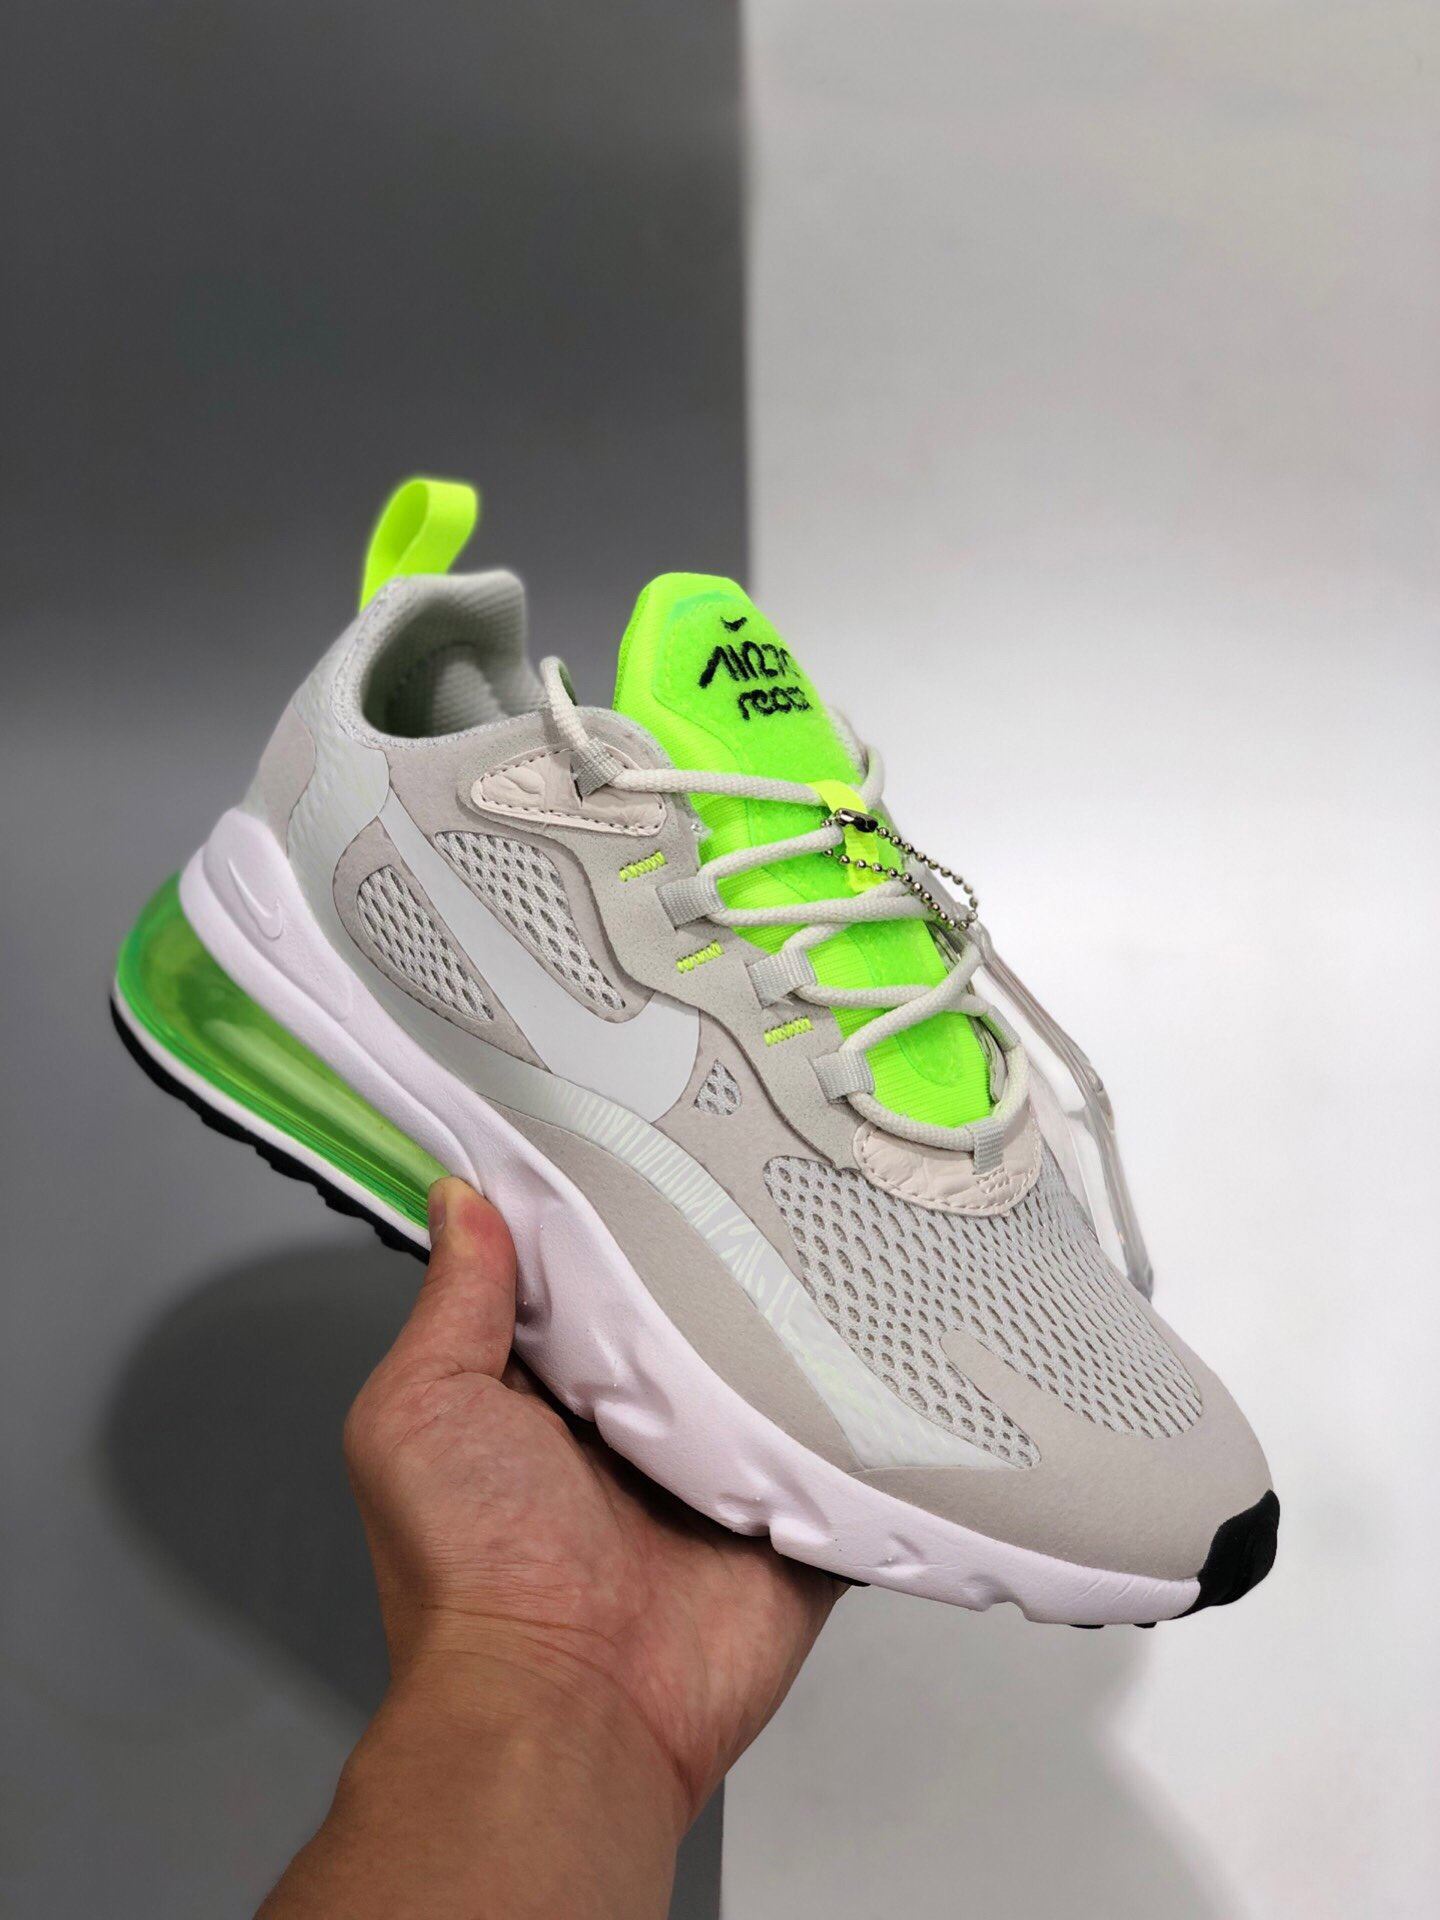 Nike Air Max 270 React Vast Grey/Ghost Green For Sale – Sneaker Hello